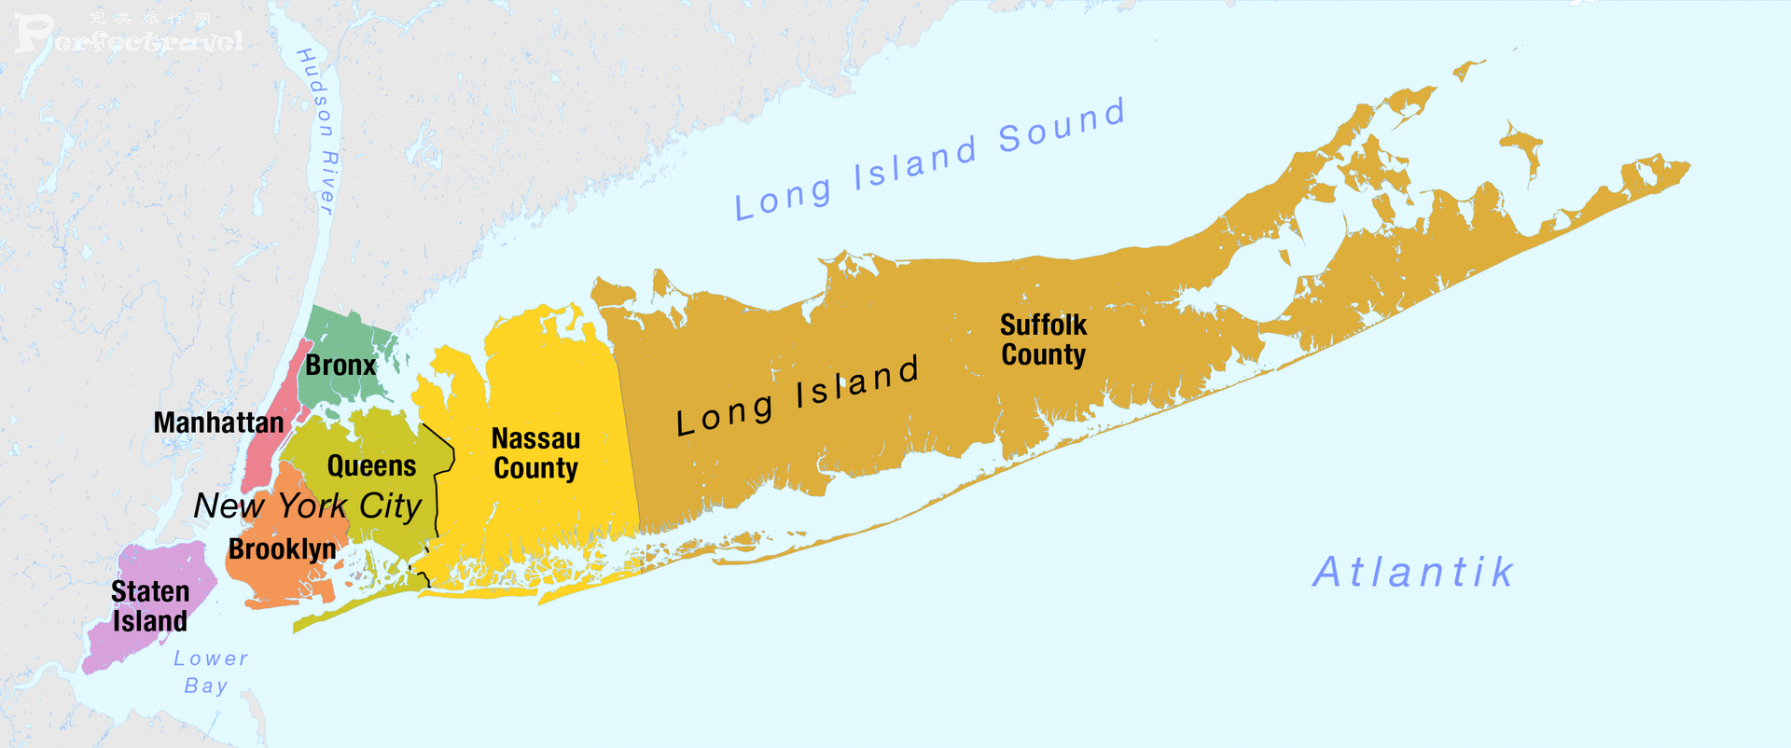 1920px-Map_of_the_Boroughs_of_New_York_City_and_the_counties_of_Long_Island.png